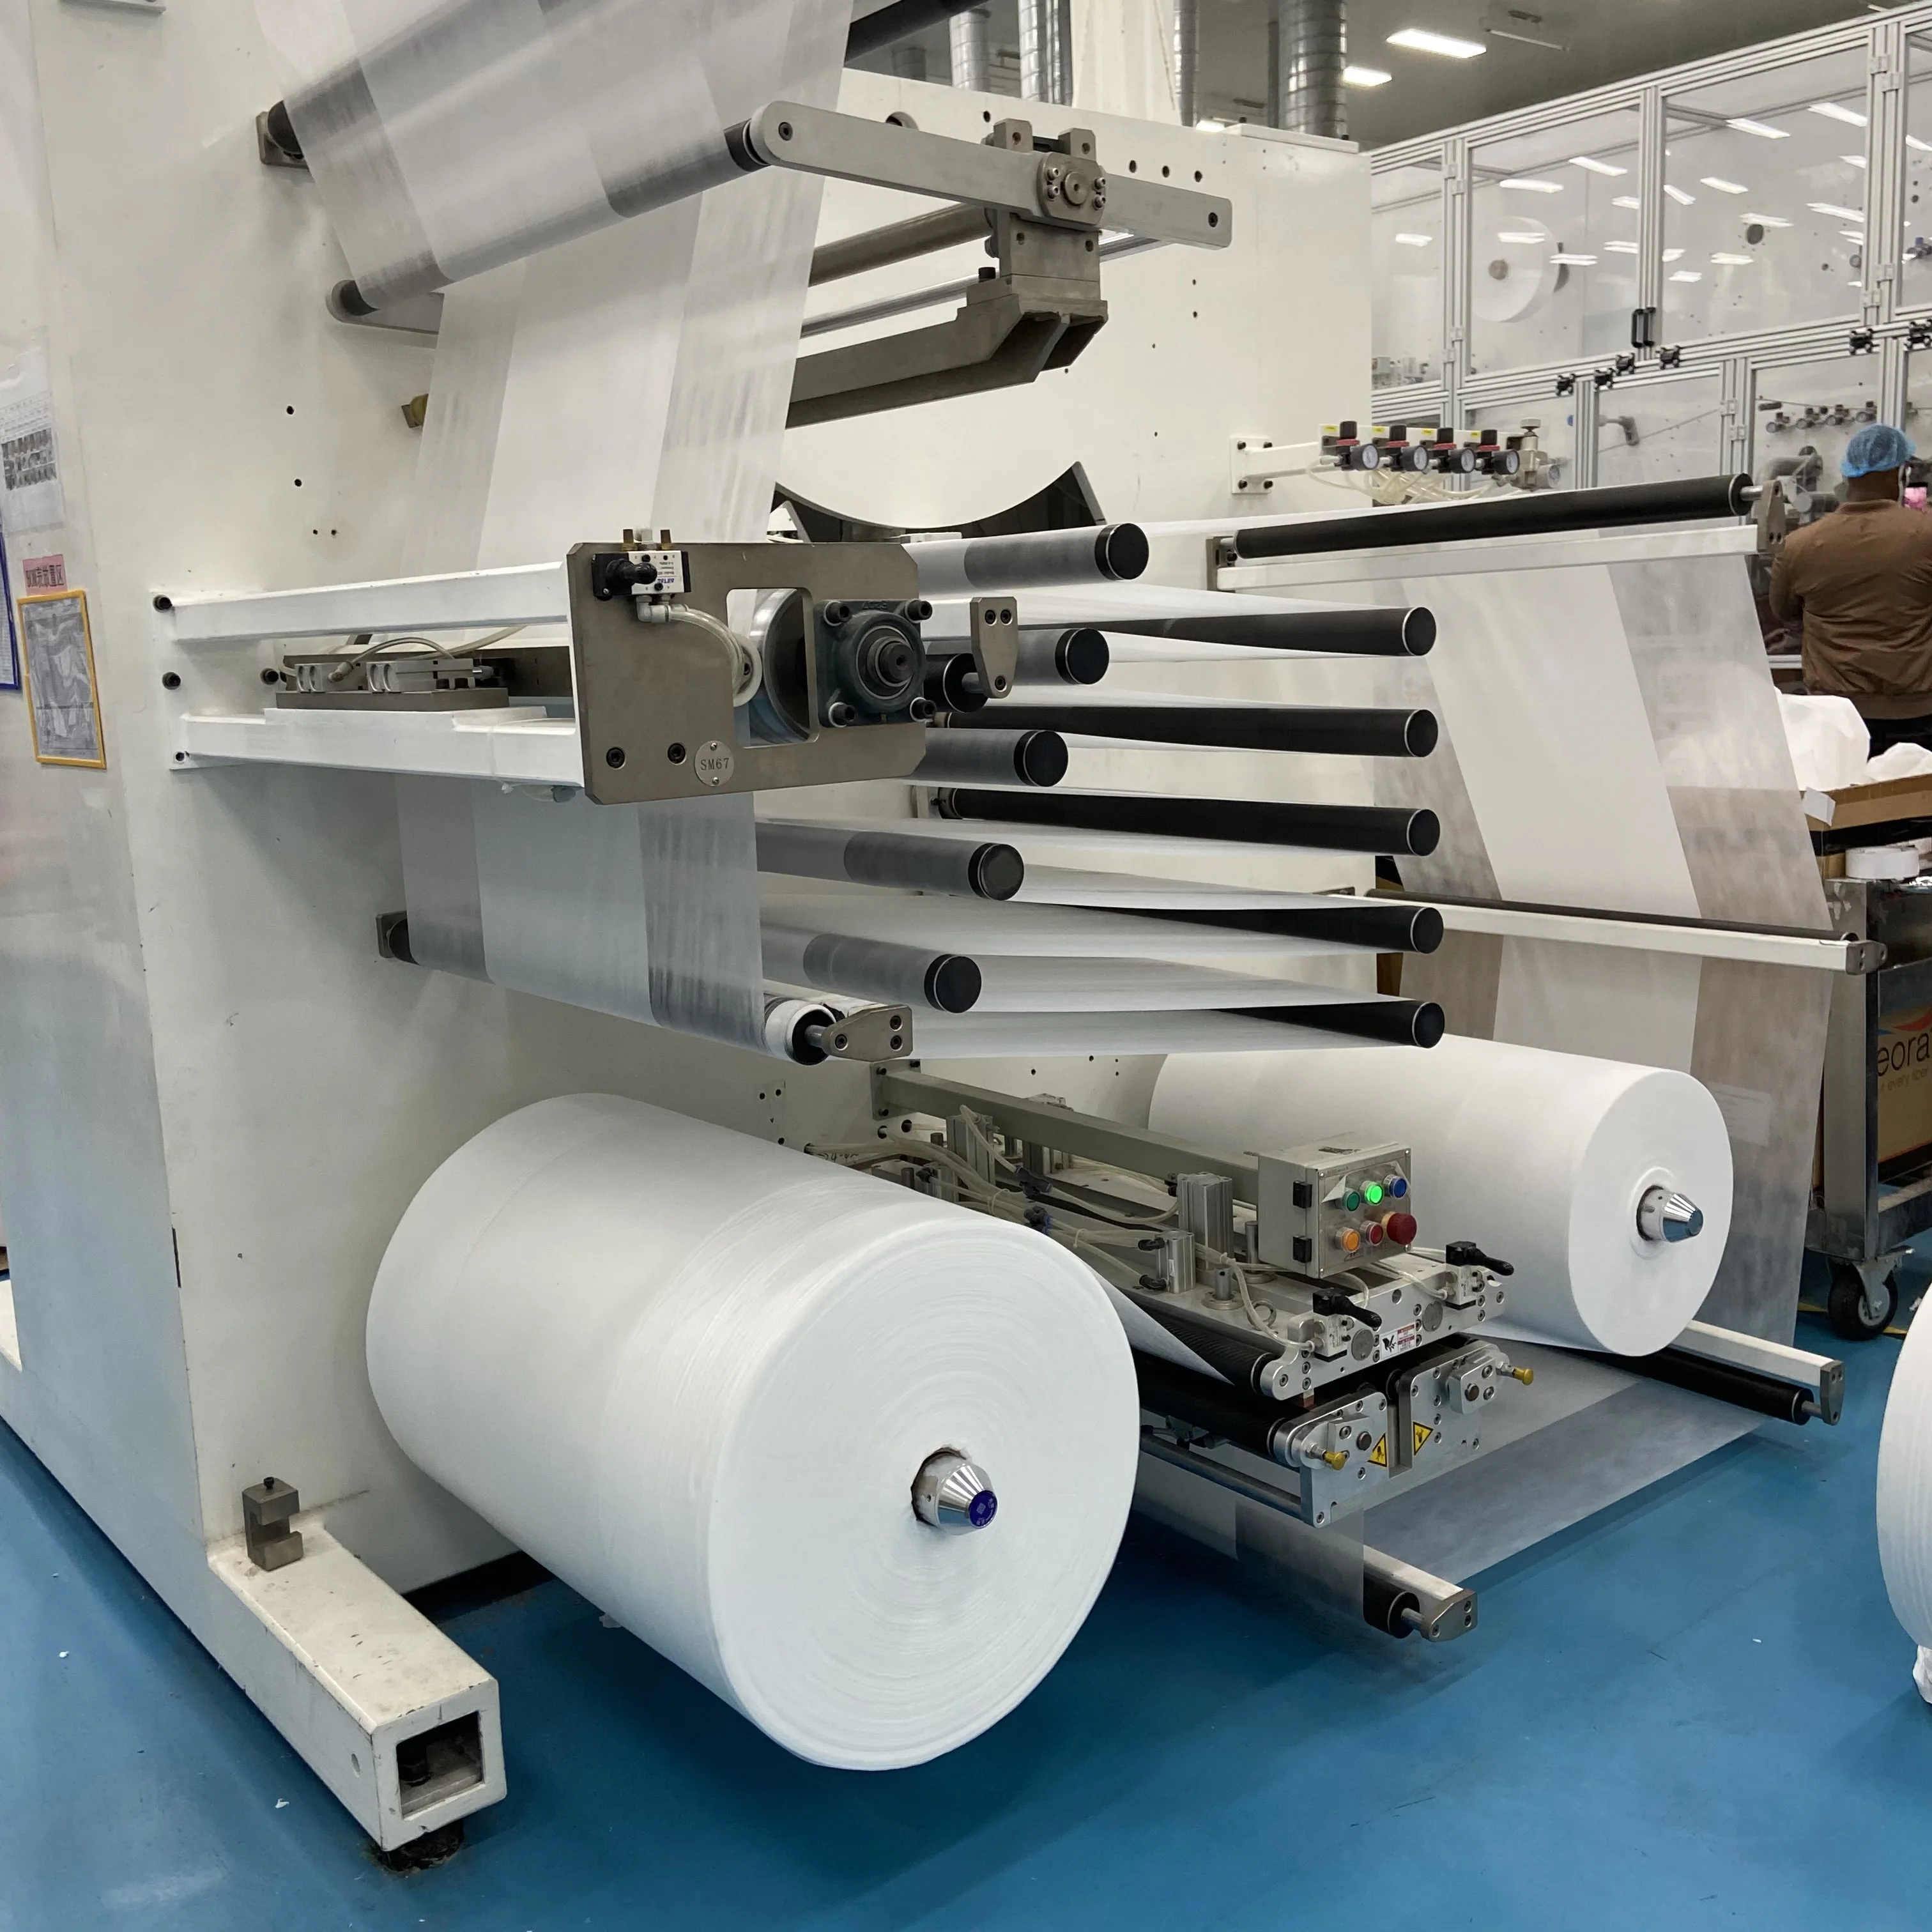 Welldone adult diapers making machine fully automatic diaper production cost